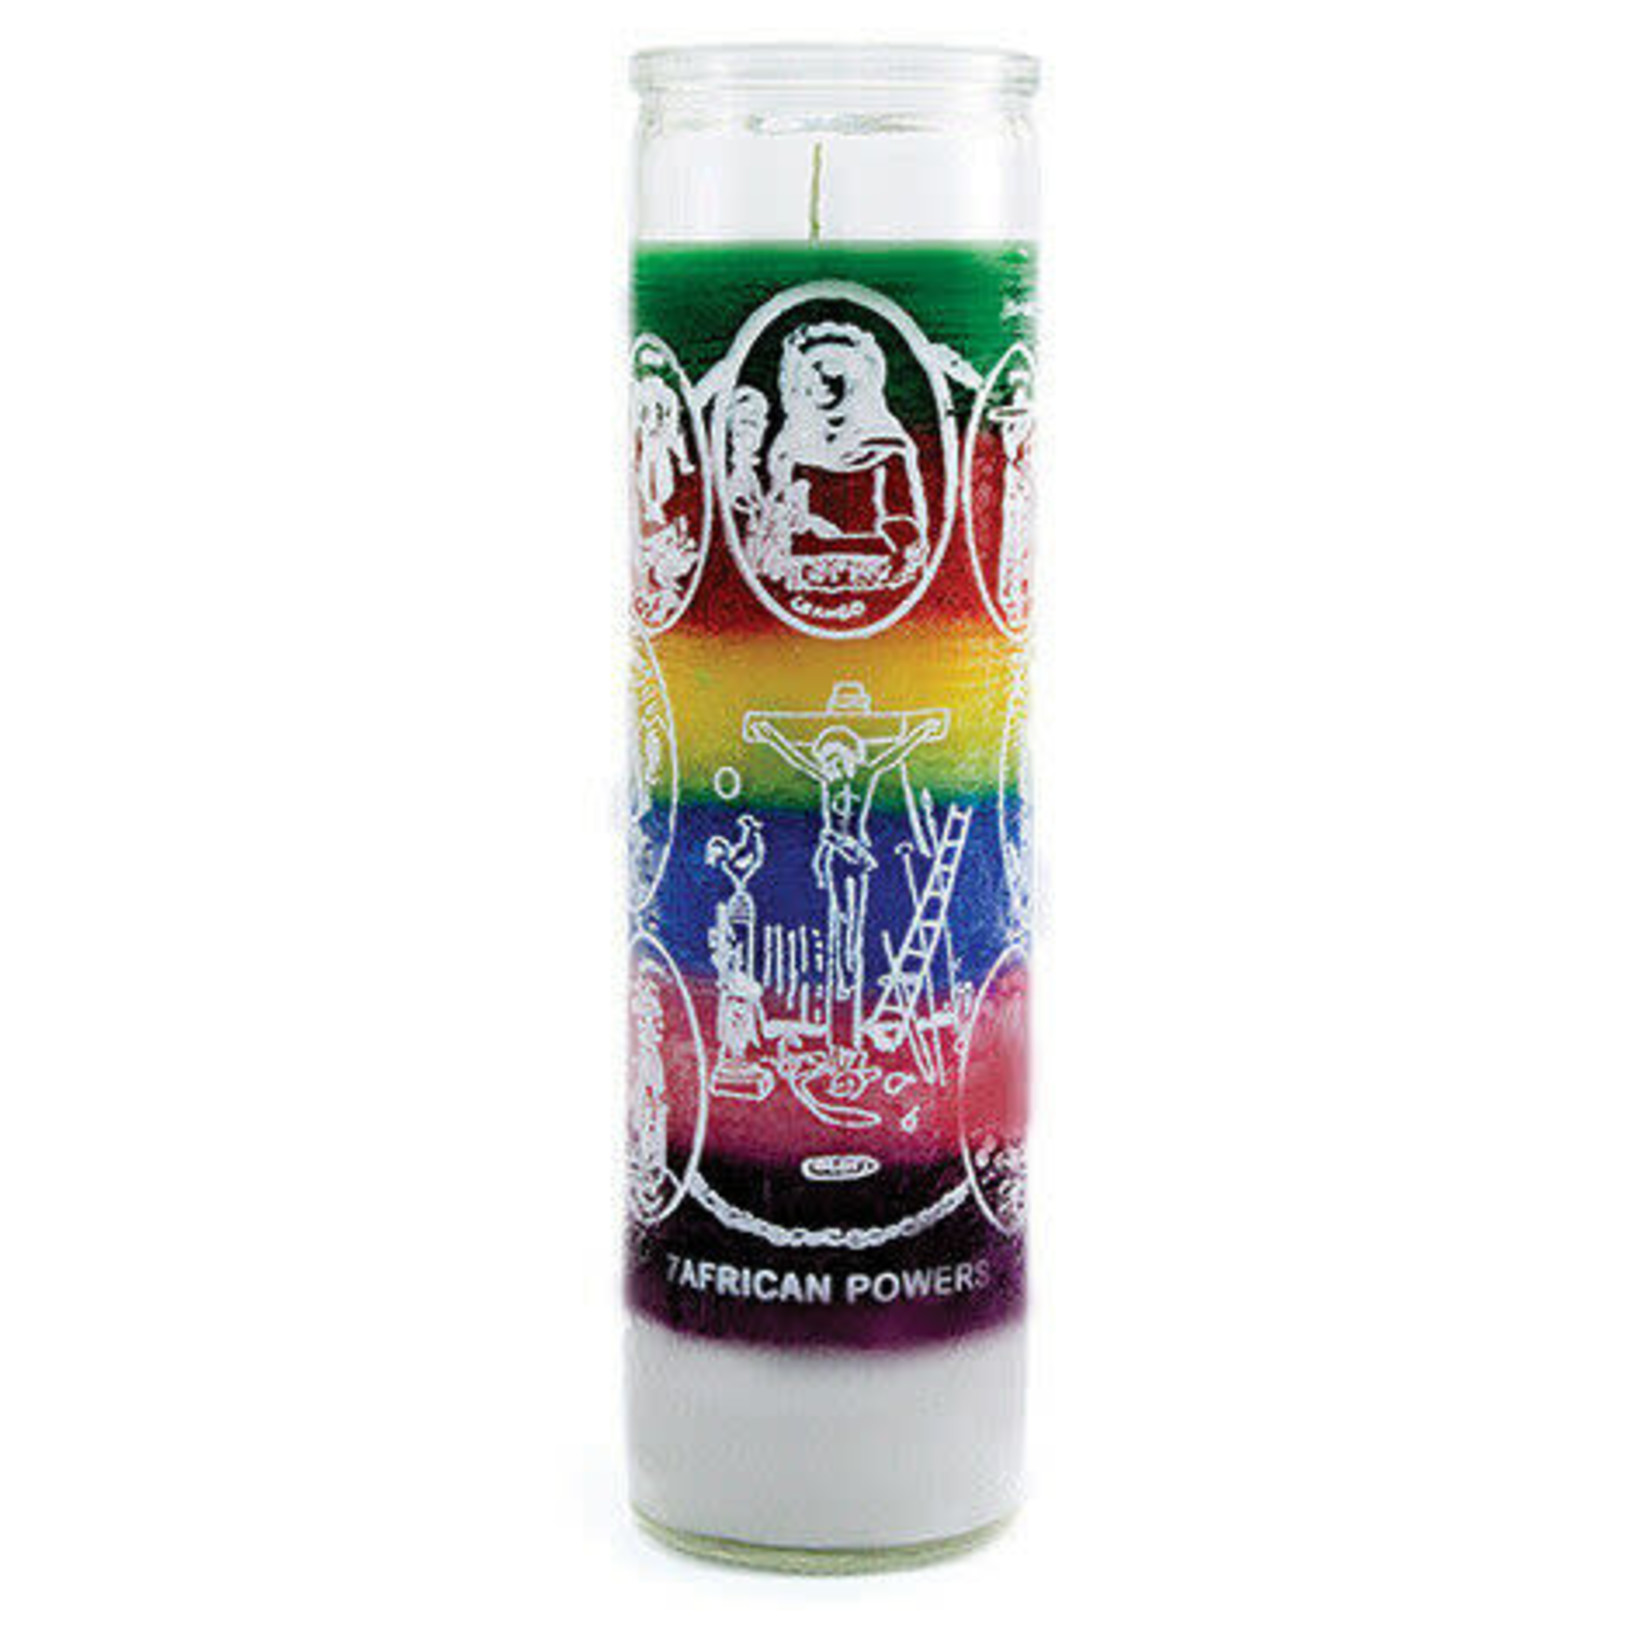 7 African Powers Seven Day Candle (7C)